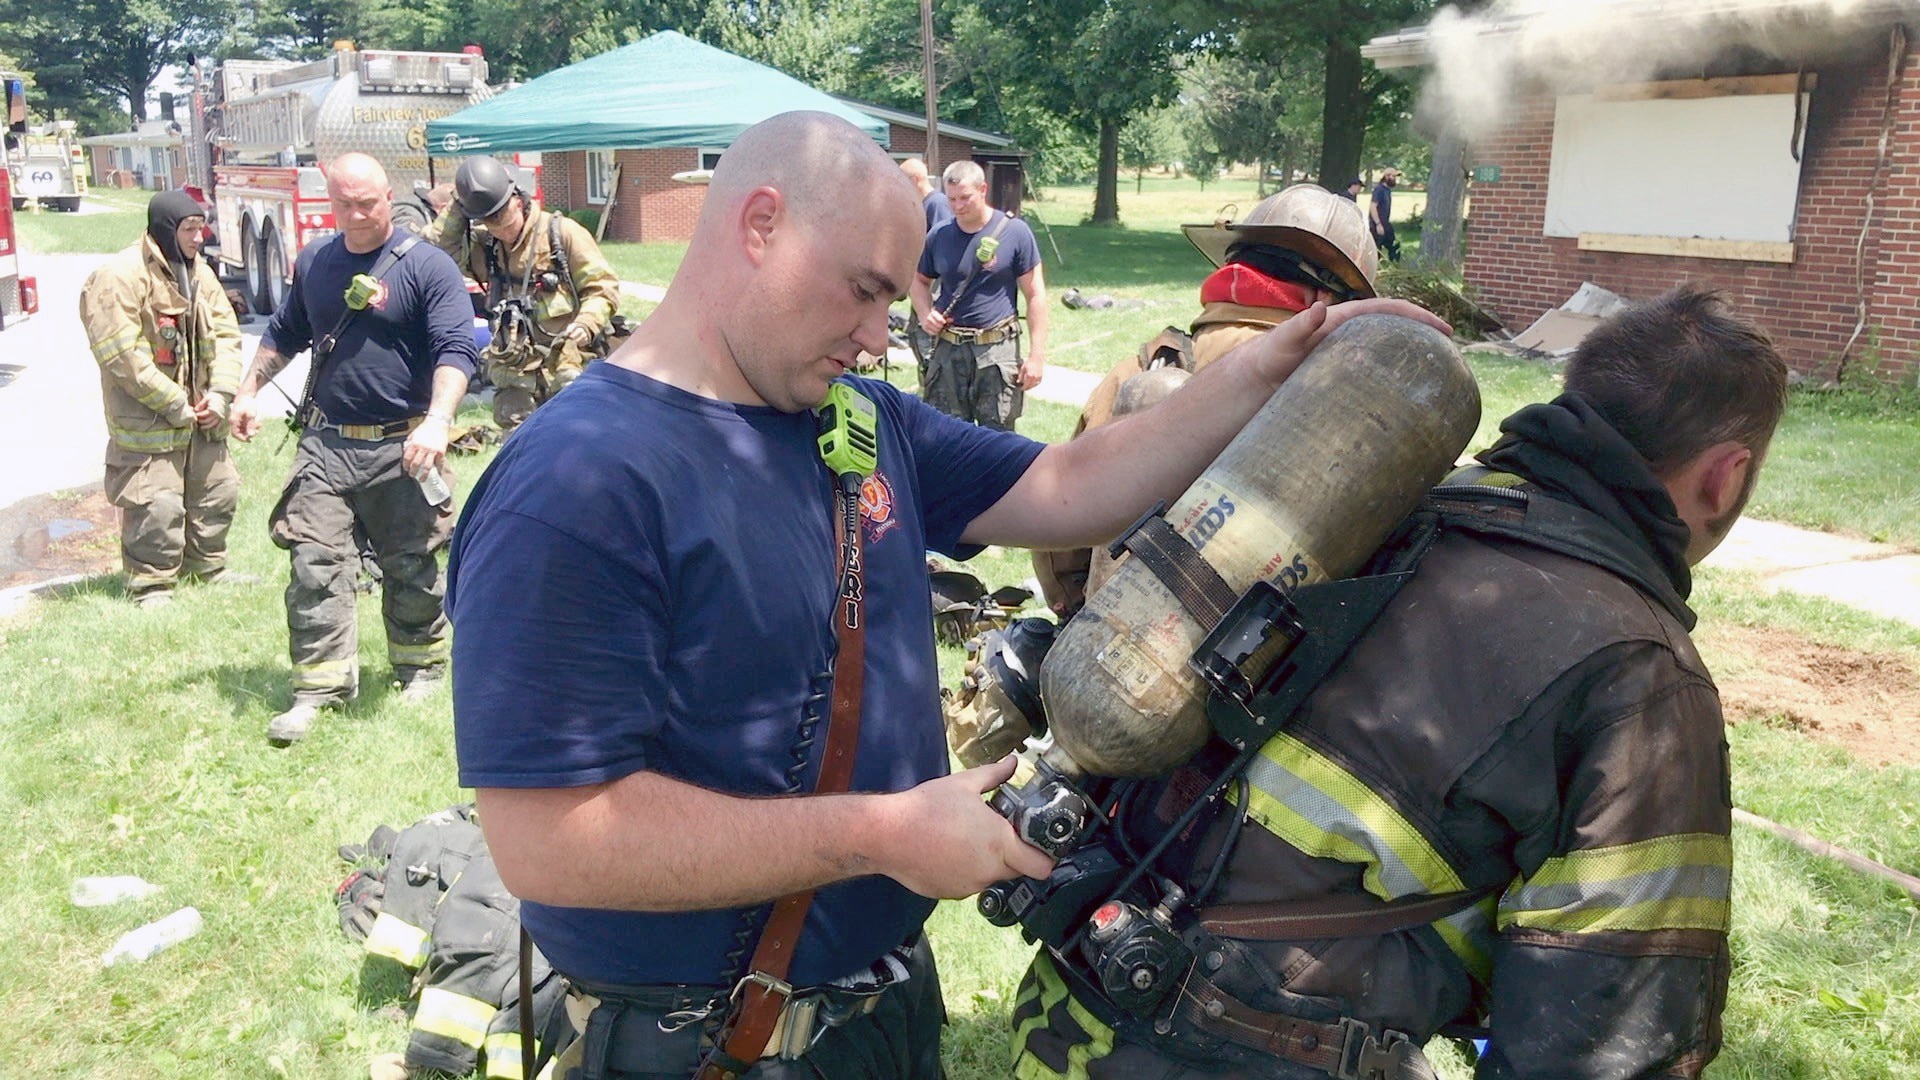 Defense Distribution Center, Susquehanna Fire and Emergency Services takes advantage of unique training opportunity